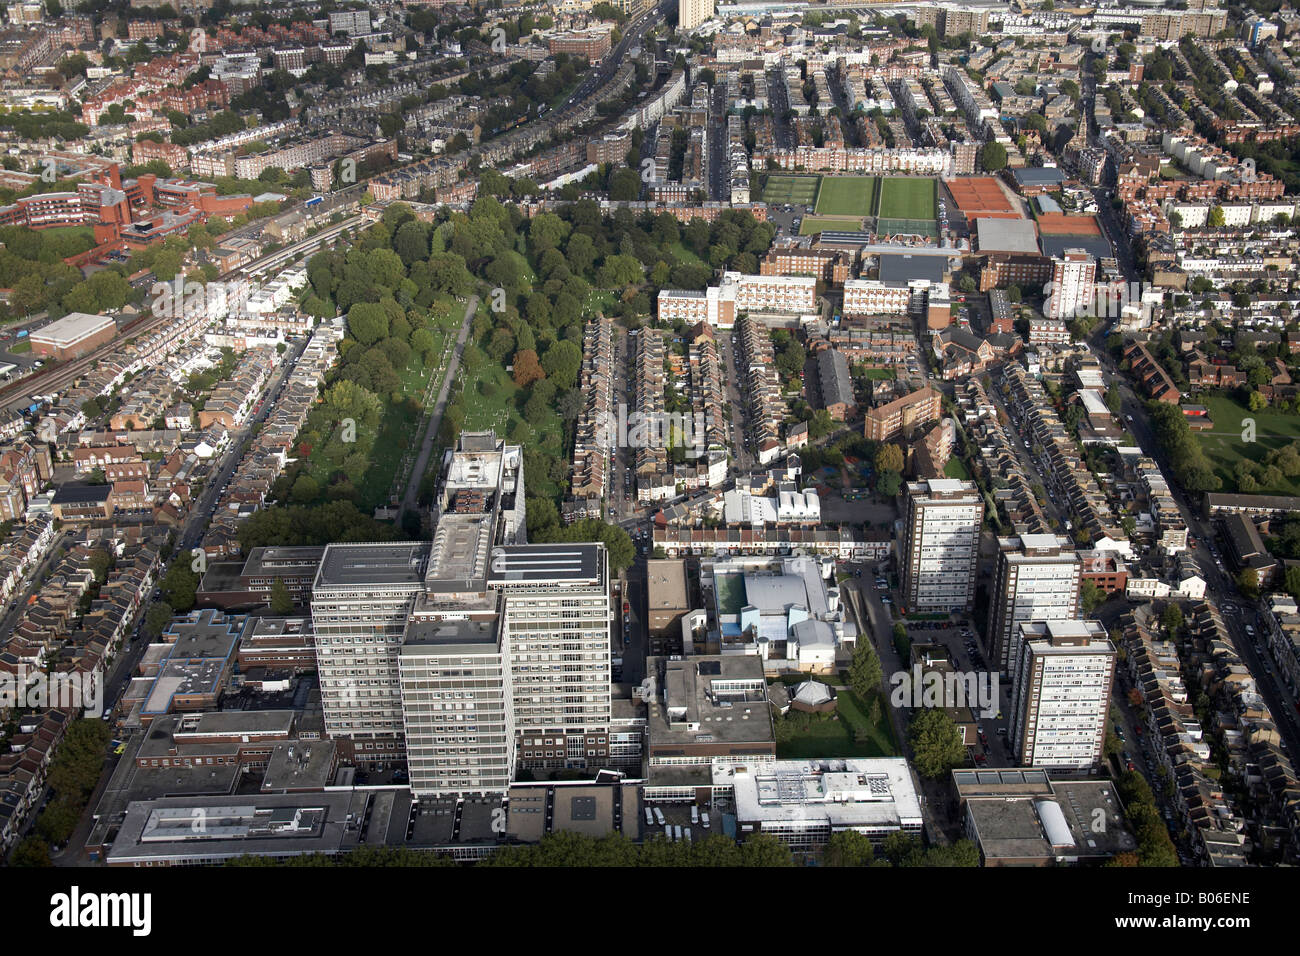 Aerial view north east of Barons Court Queen s Club Tennis Courts Hammersmith Cemetery Charing Cross Hospital London W6 W14 UK Stock Photo